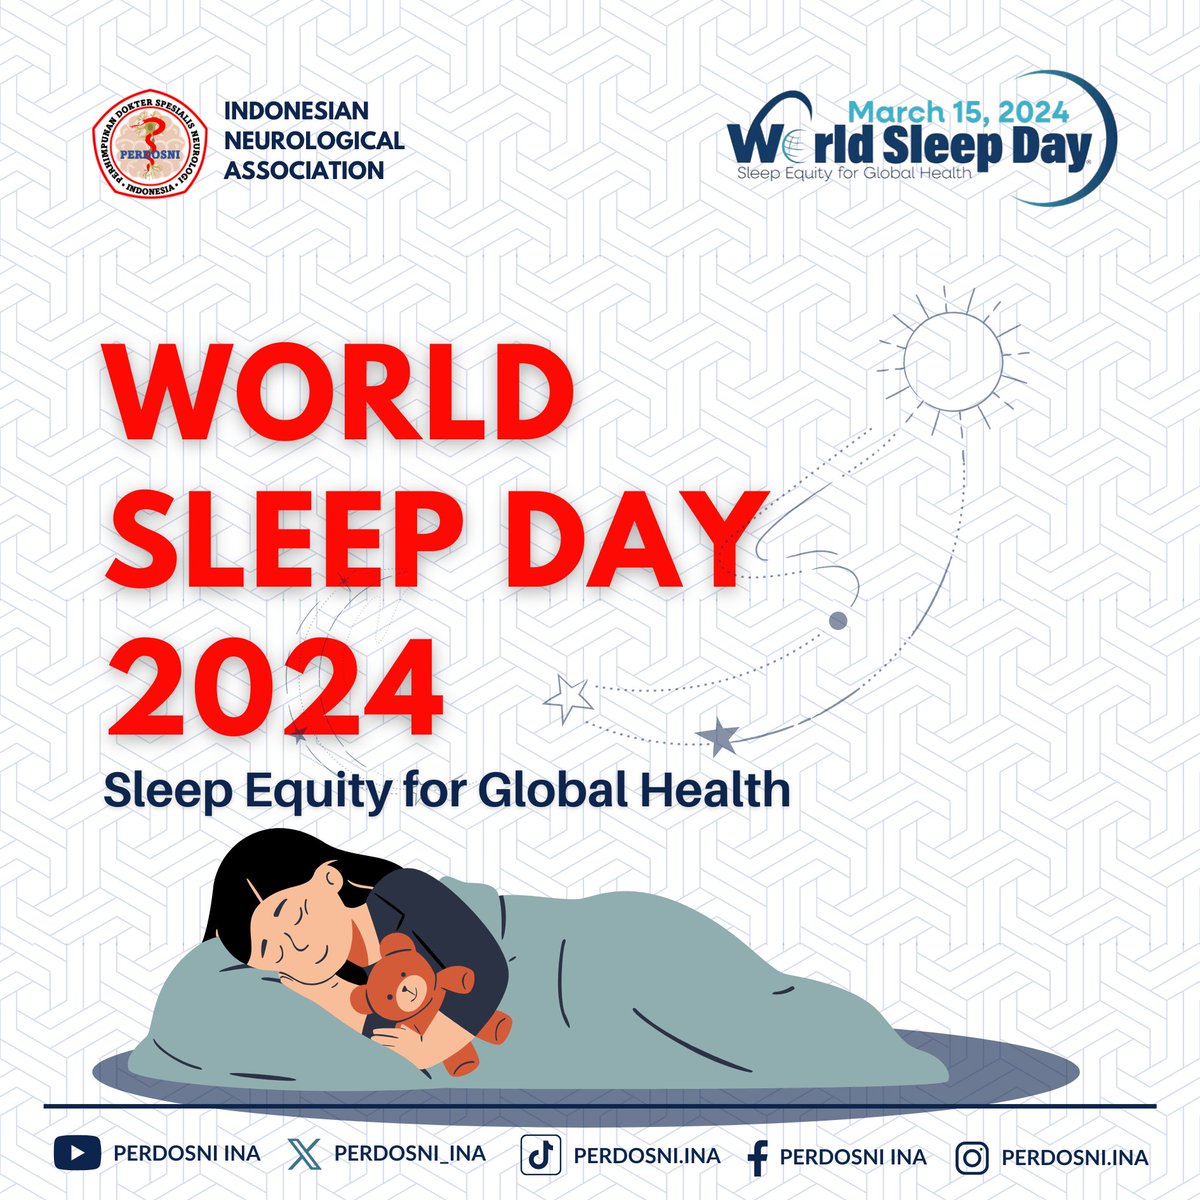 It’s World Sleep Day 💤
Often underestimated, yet sleep is very important and has many benefits for our body.
Sufficient rest helps the mind to be more focused, improves mood, and also enhances neural physical performance ✨
#SleepEquityforGlobalHealth #worldsleepday2024